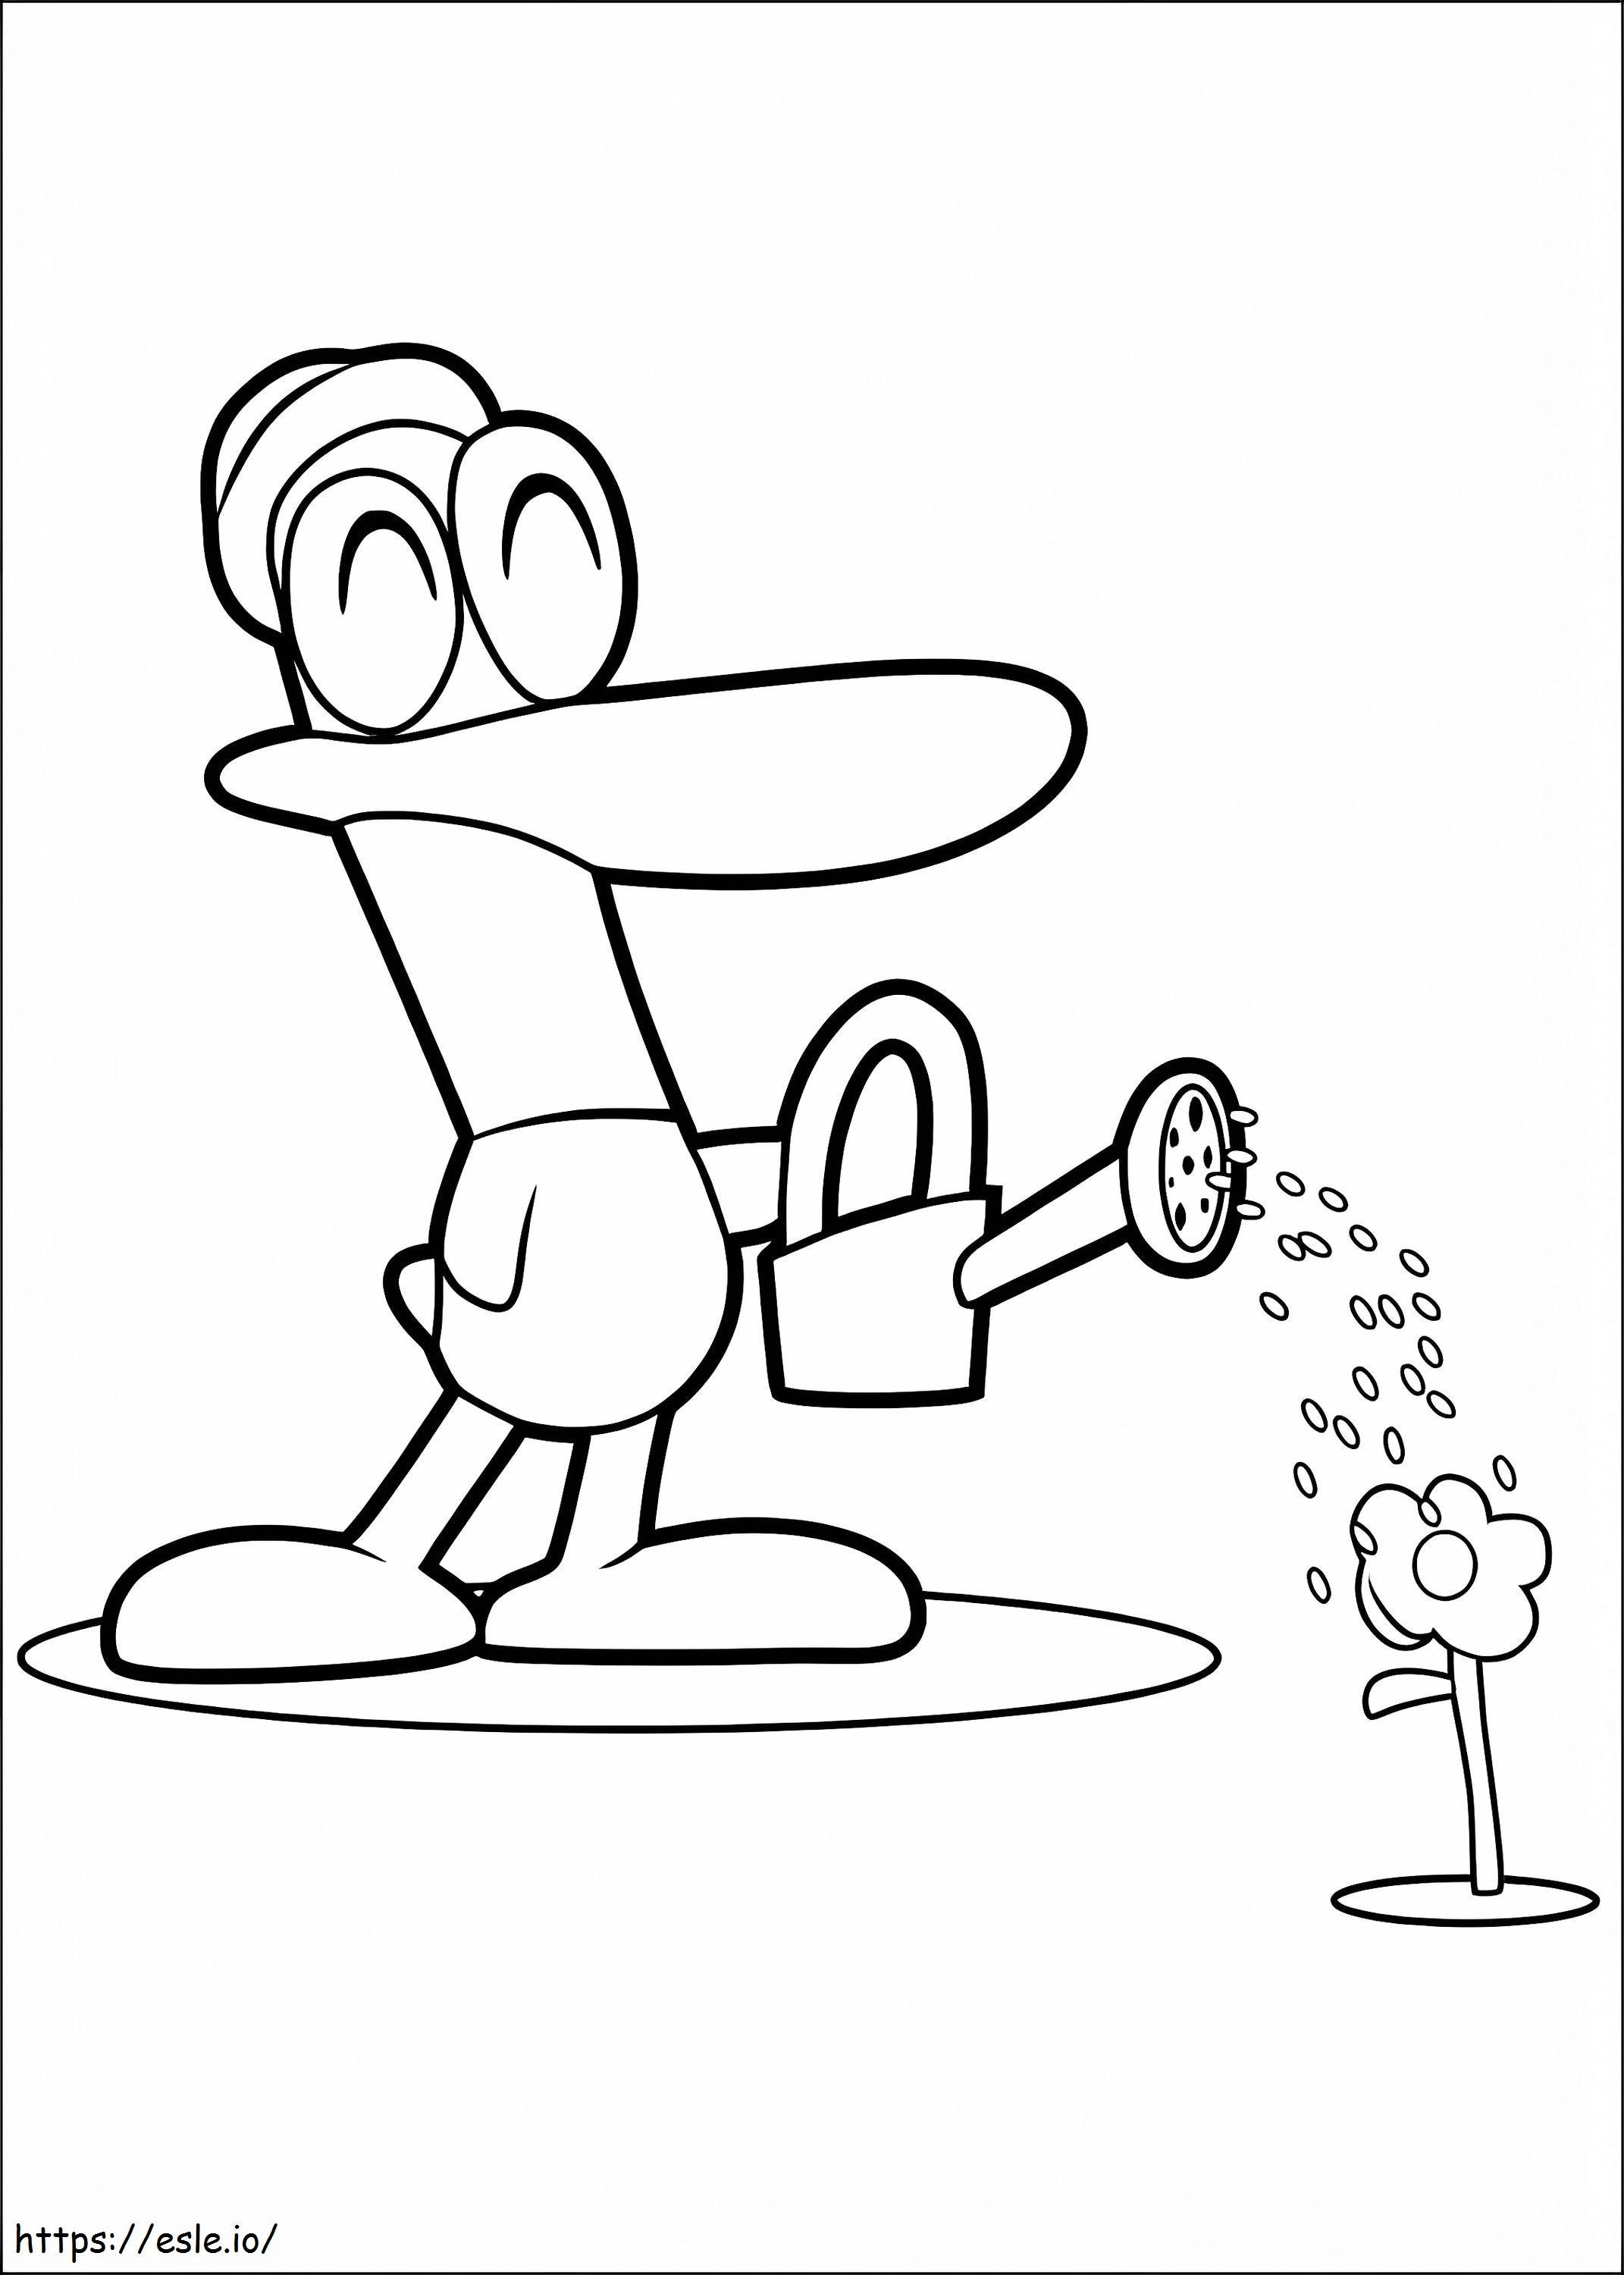 Duck Watering The Plants coloring page